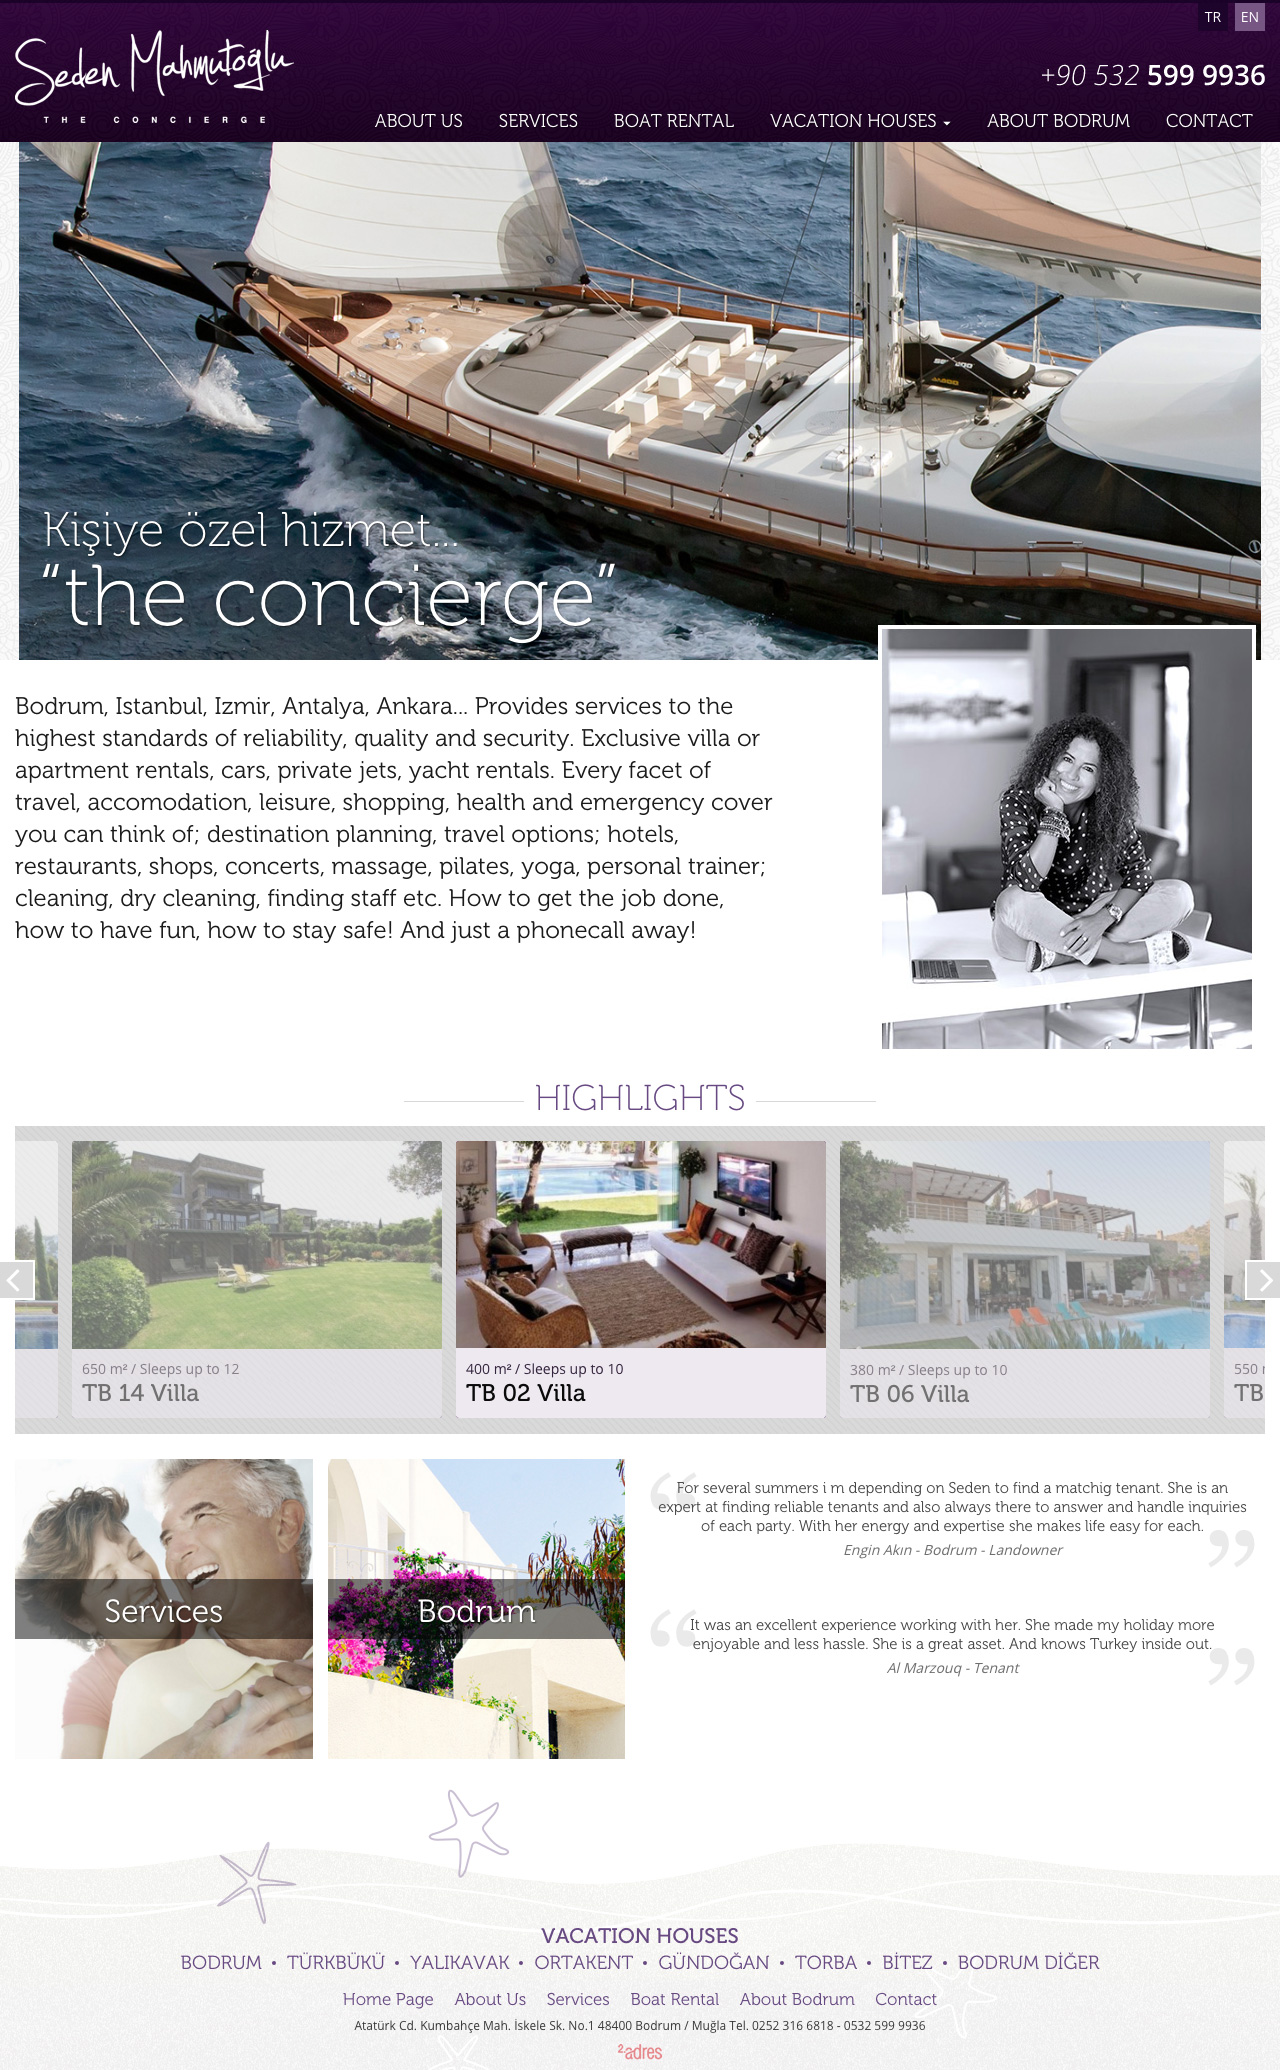 The Concierge Home Page